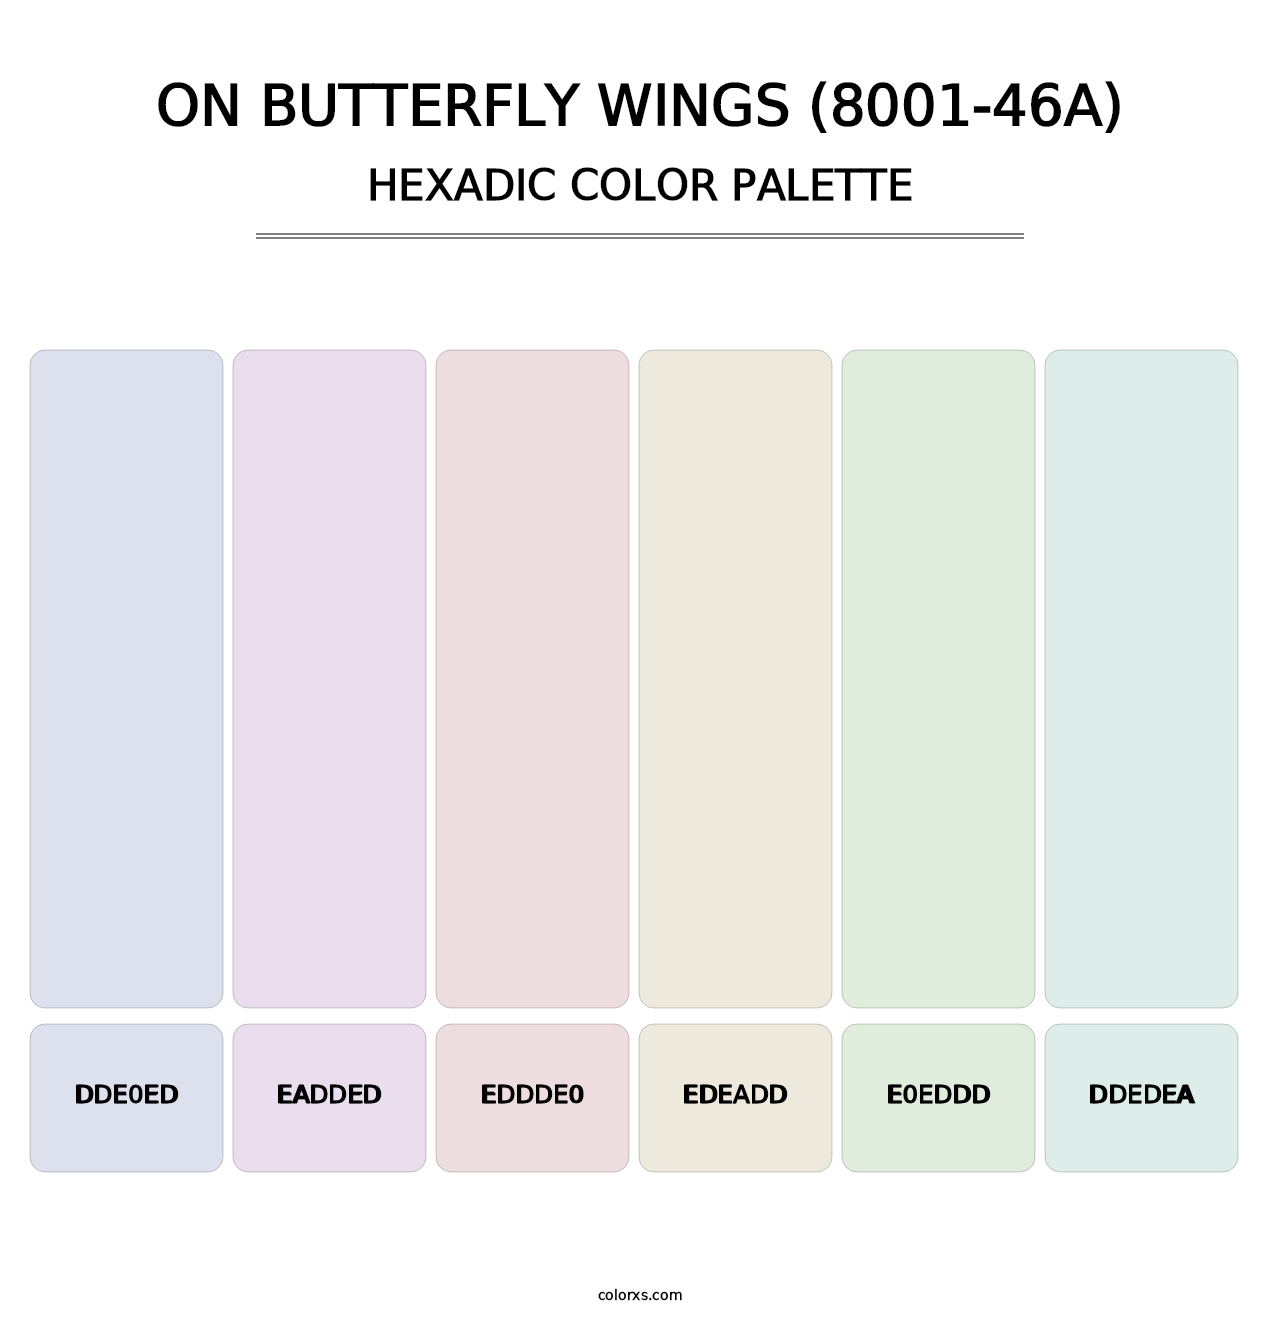 On Butterfly Wings (8001-46A) - Hexadic Color Palette